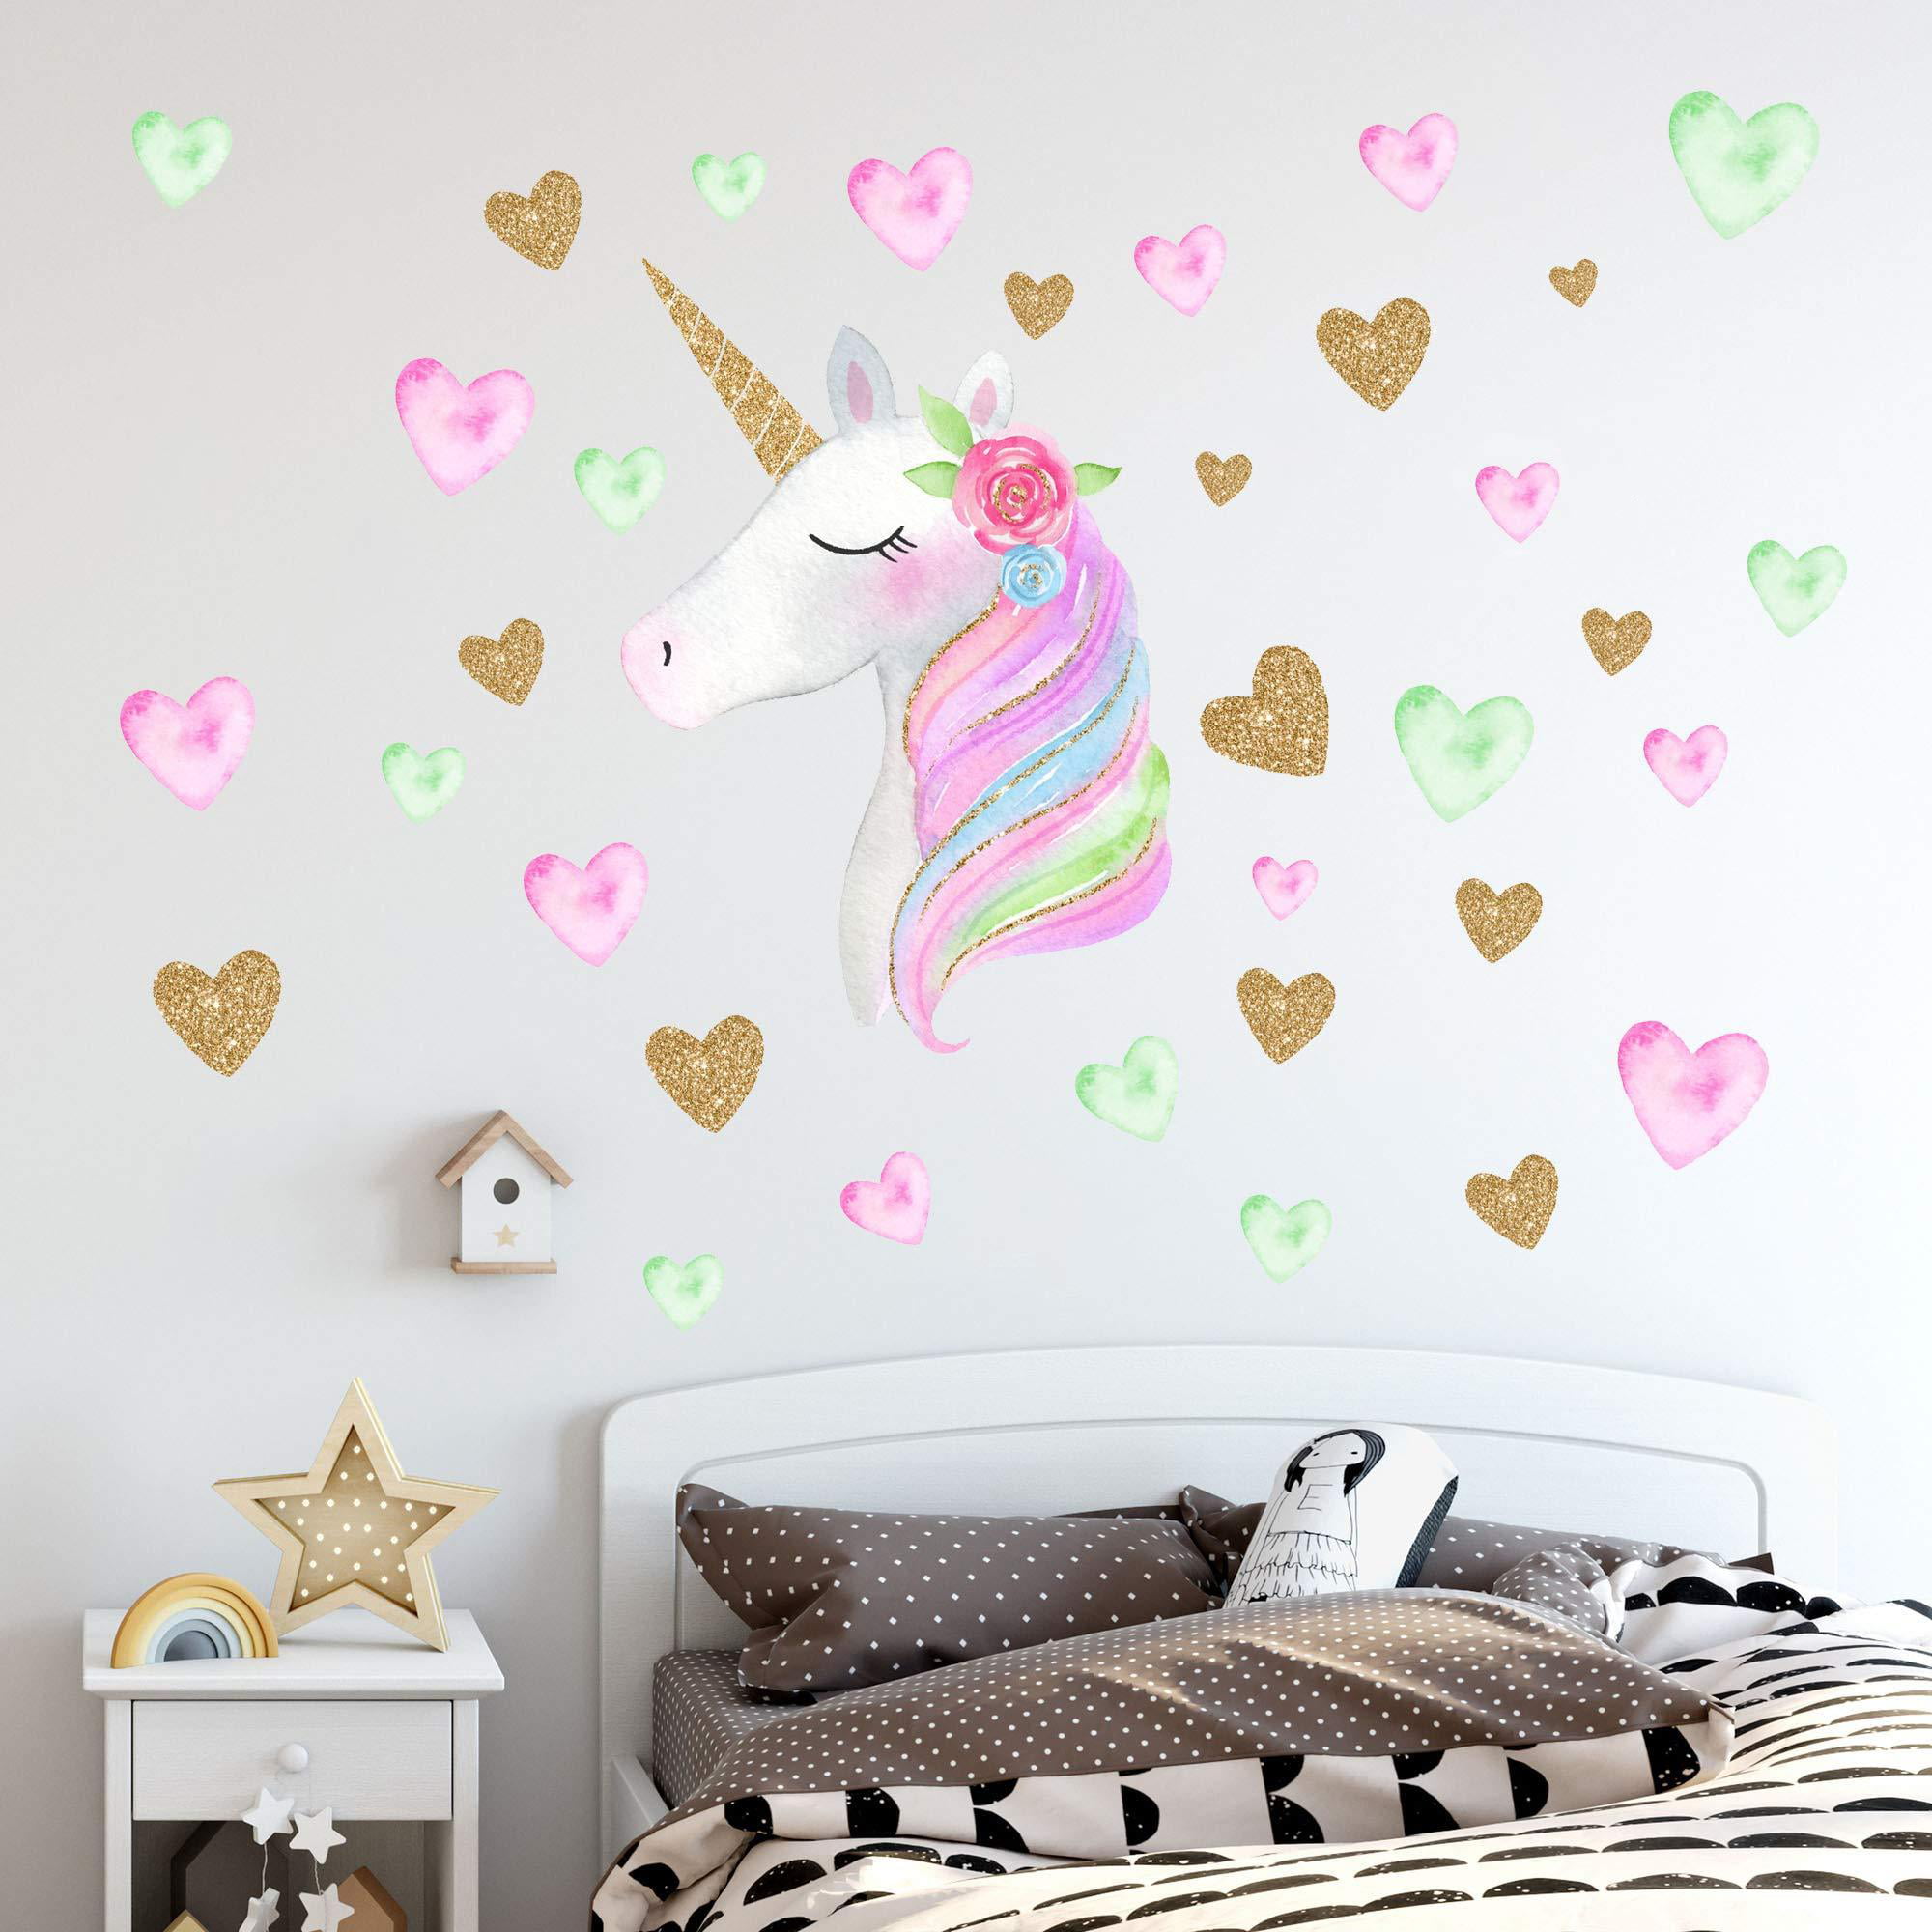 Kids Girls Bedroom Decor Unicorn Wall Decals Stickers With Heart Flower 